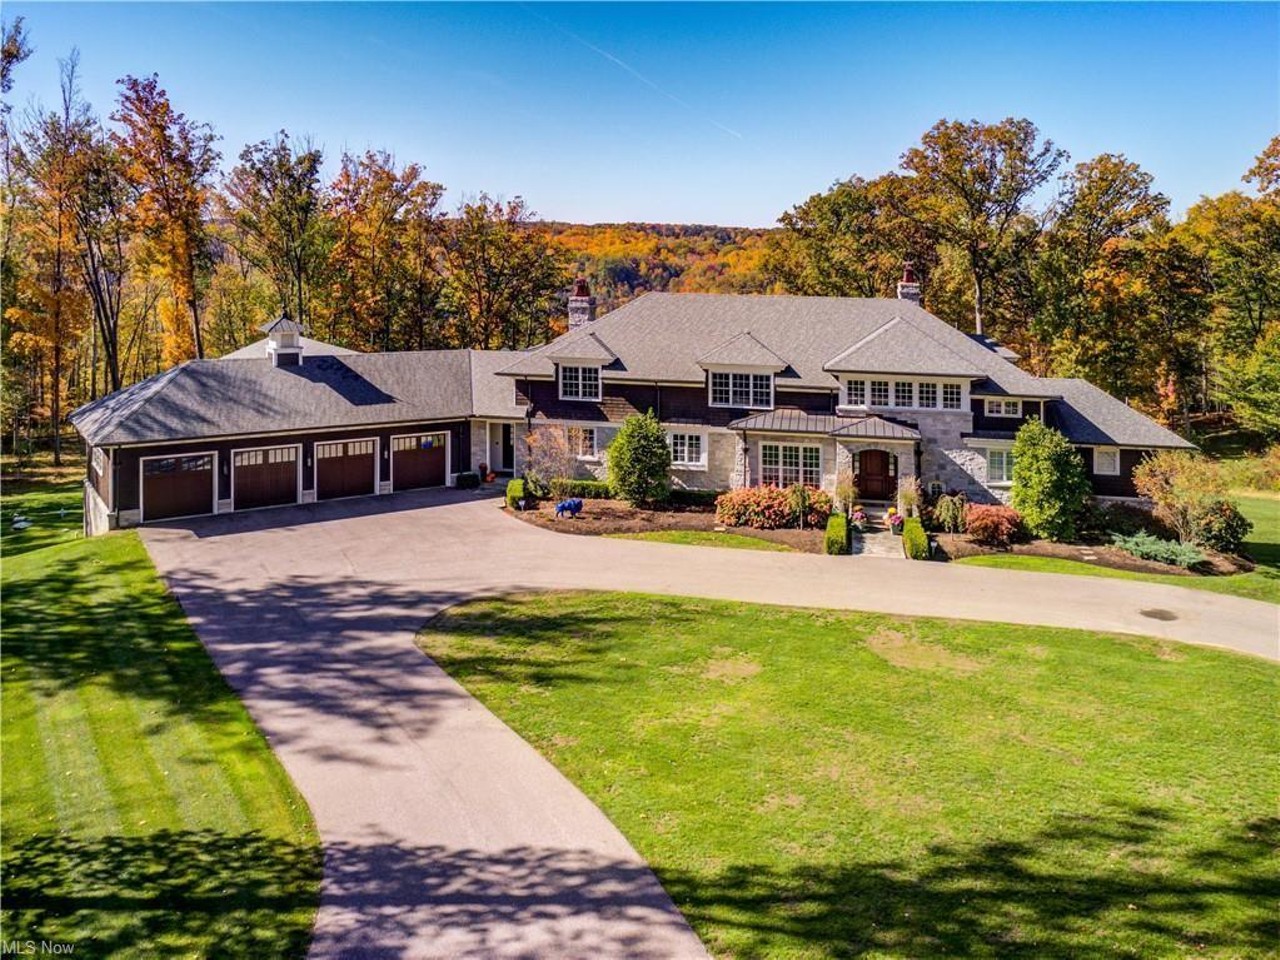  7900 Gray Eagle Chase, Gates Mills 
$3,900,000, 13,315 Square Feet, 11.16 Acre Lot